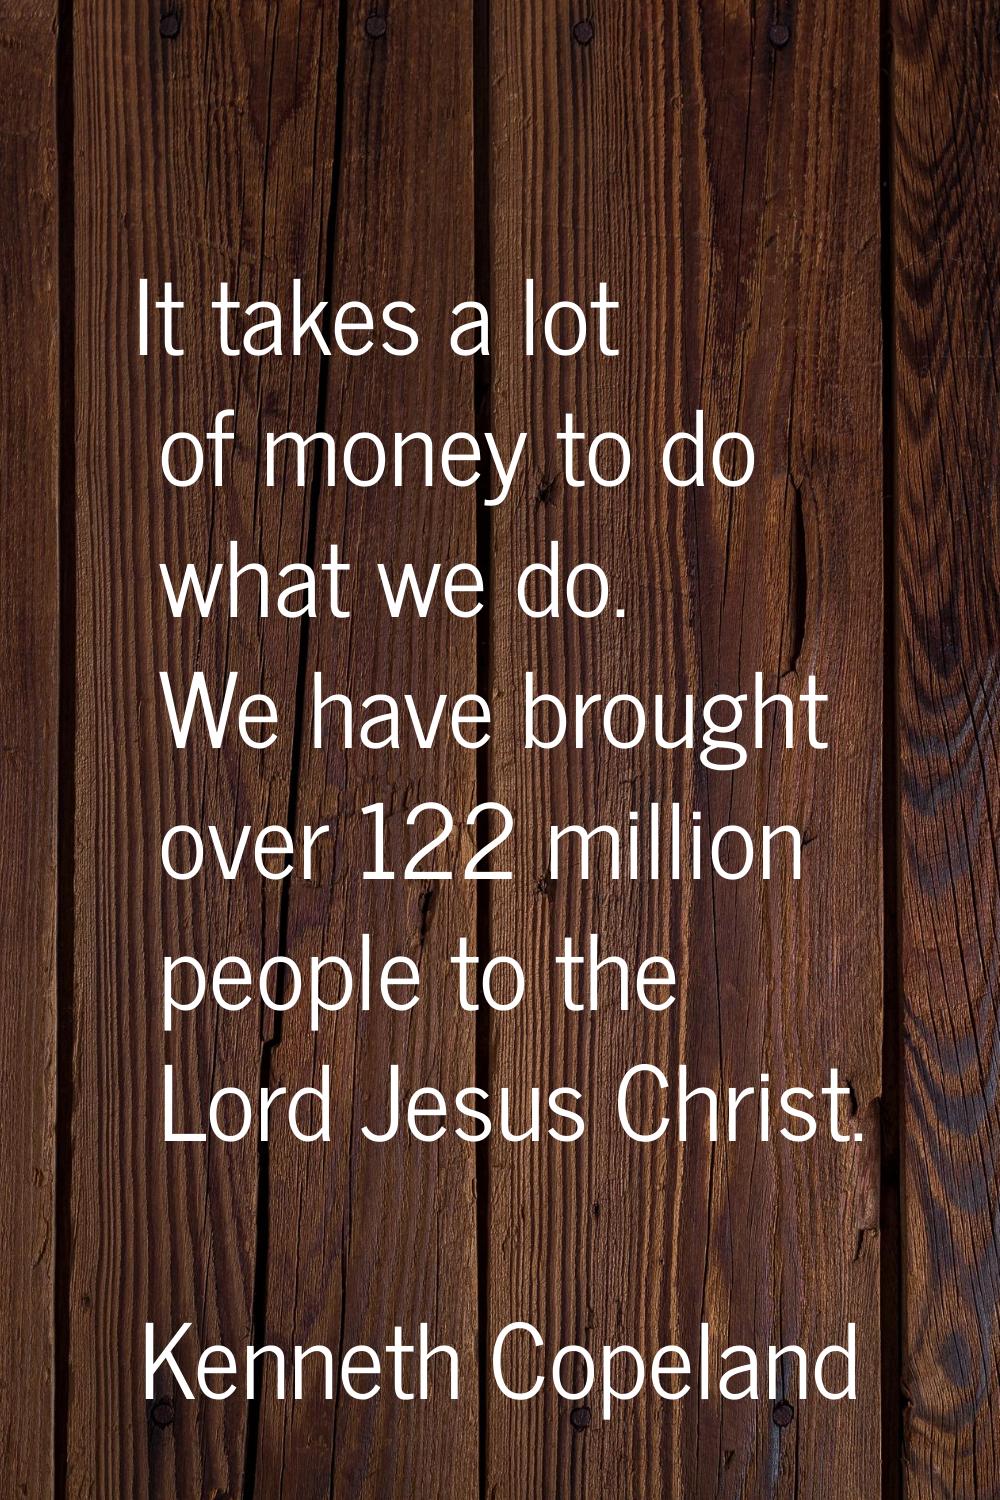 It takes a lot of money to do what we do. We have brought over 122 million people to the Lord Jesus